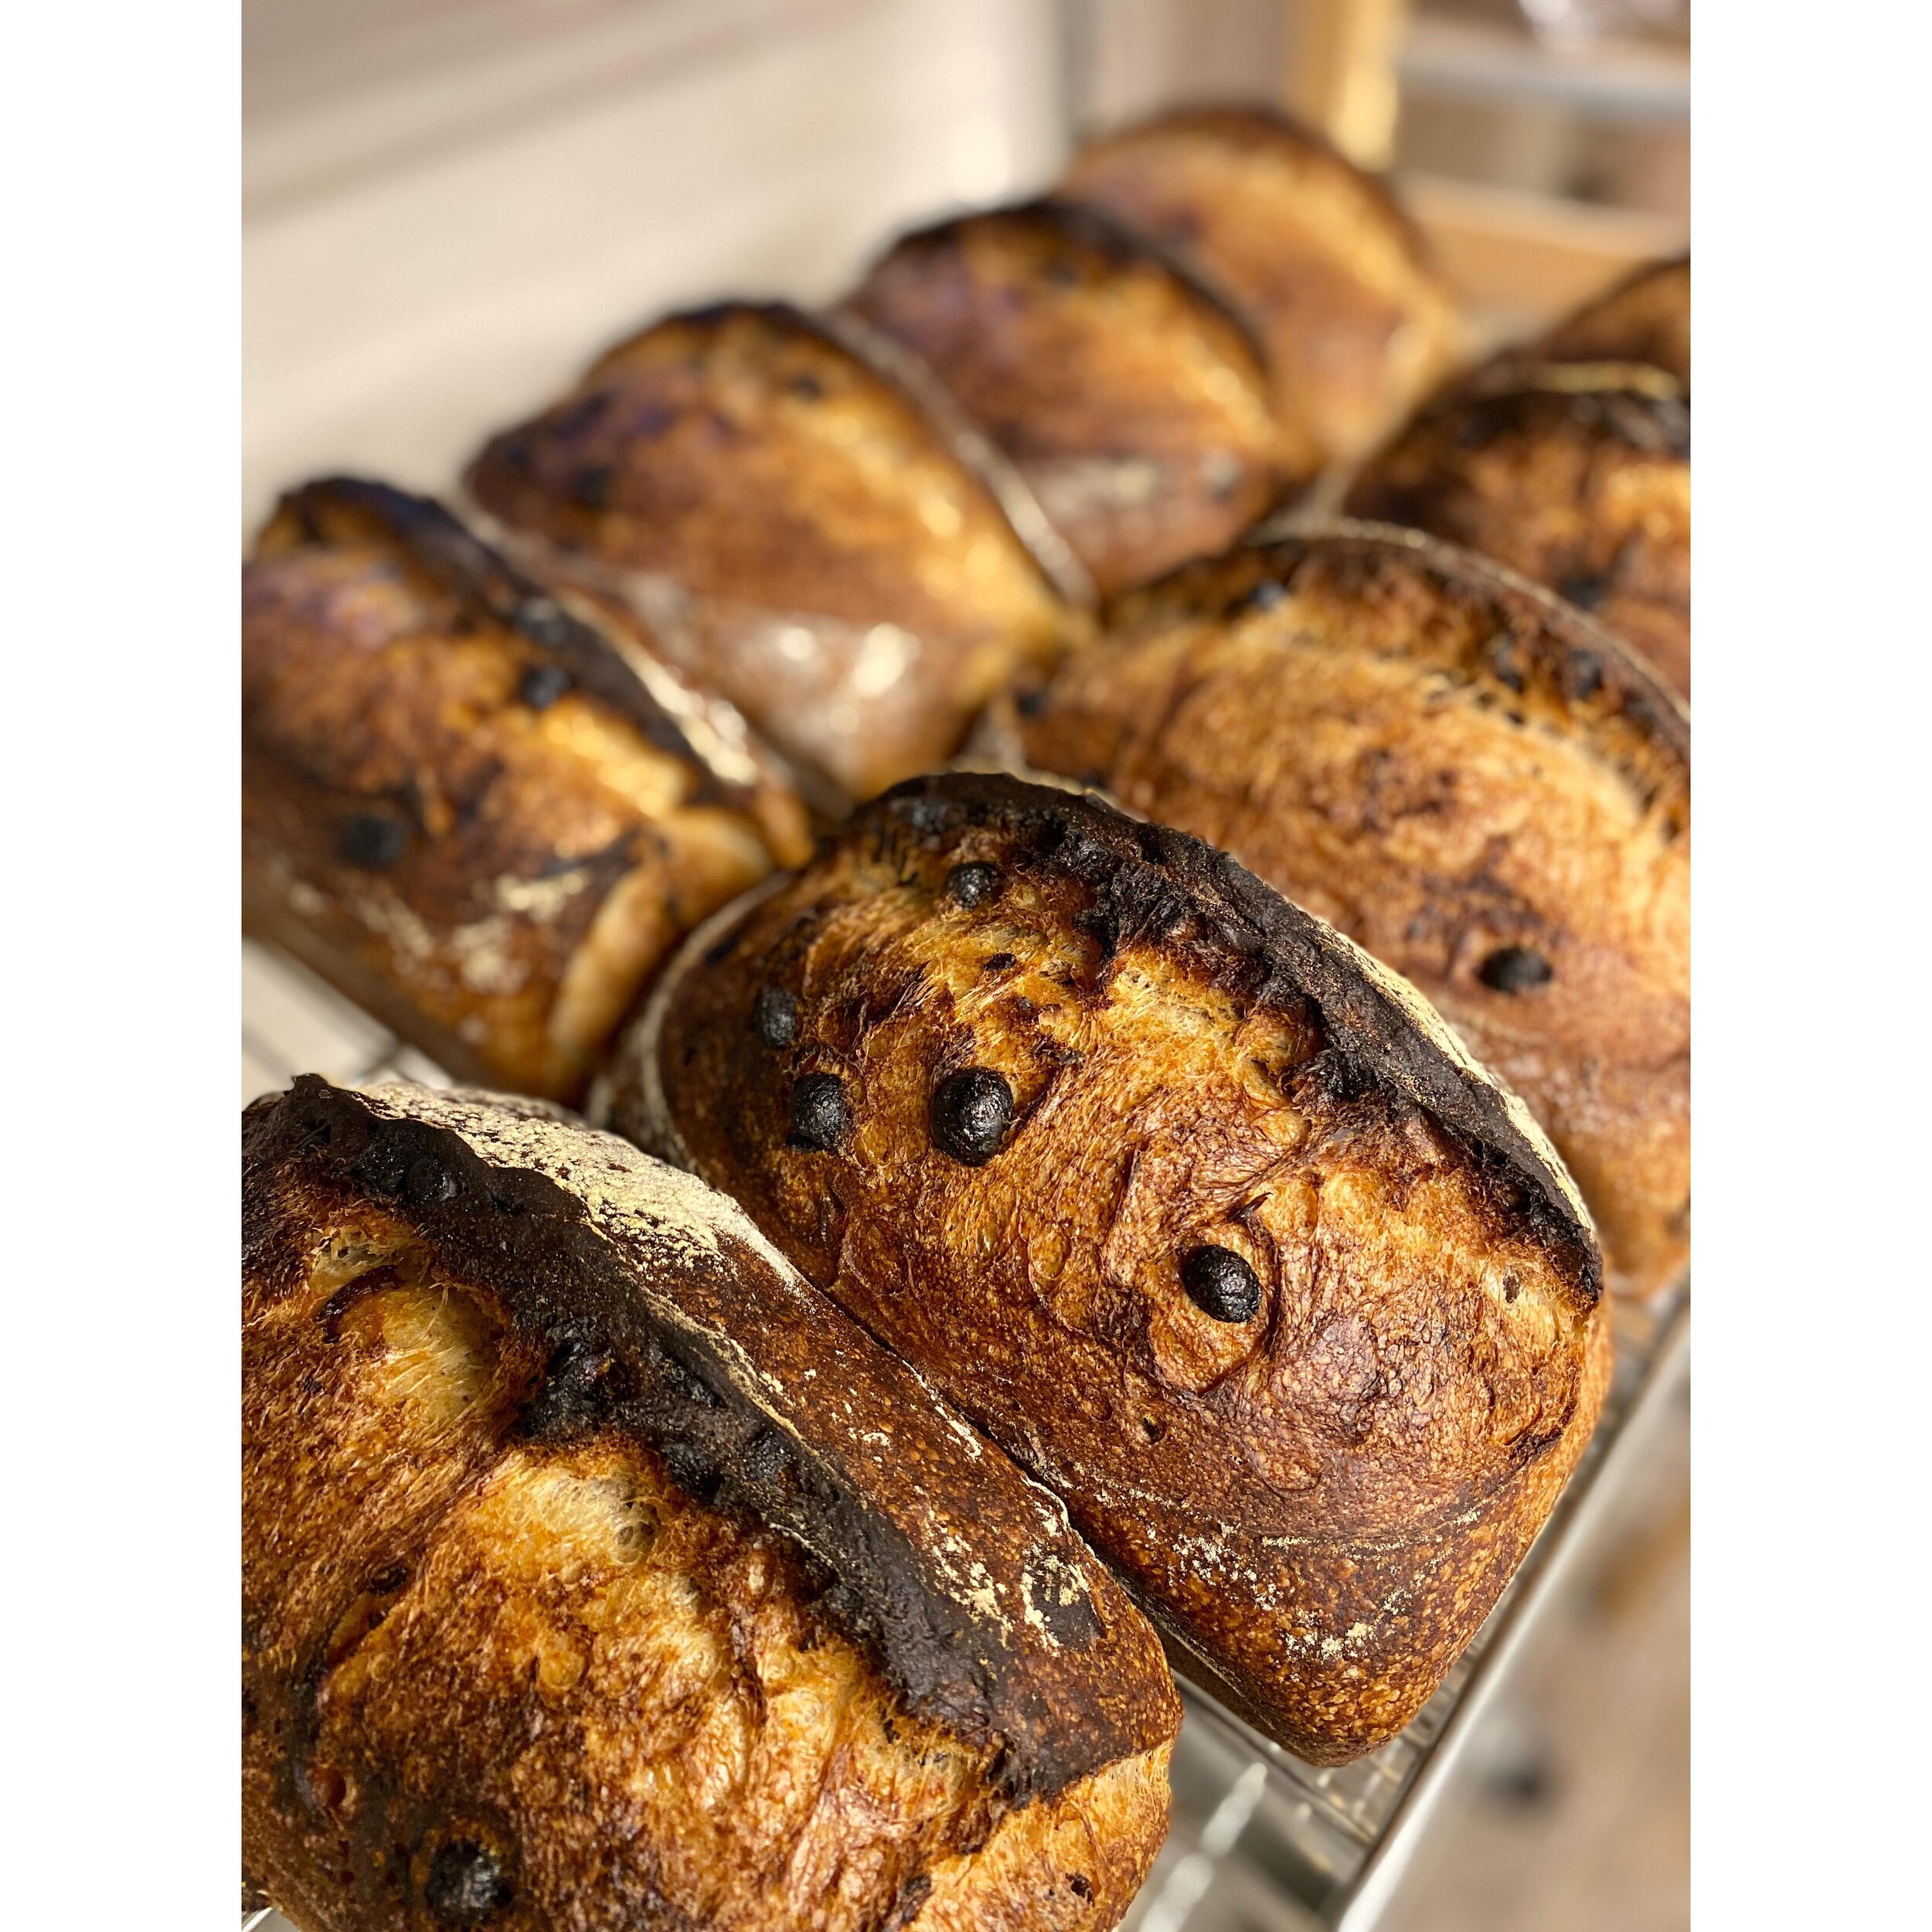 Bread is live for this week with options like Cinnamon Raisin Tin whose raisins are soaked in Triple Sec before mixing (pictured), Sesame Semolina Epi&rsquo;s, Babka and more. As always, all naturally leavened with our wild yeast sourdough starter, C